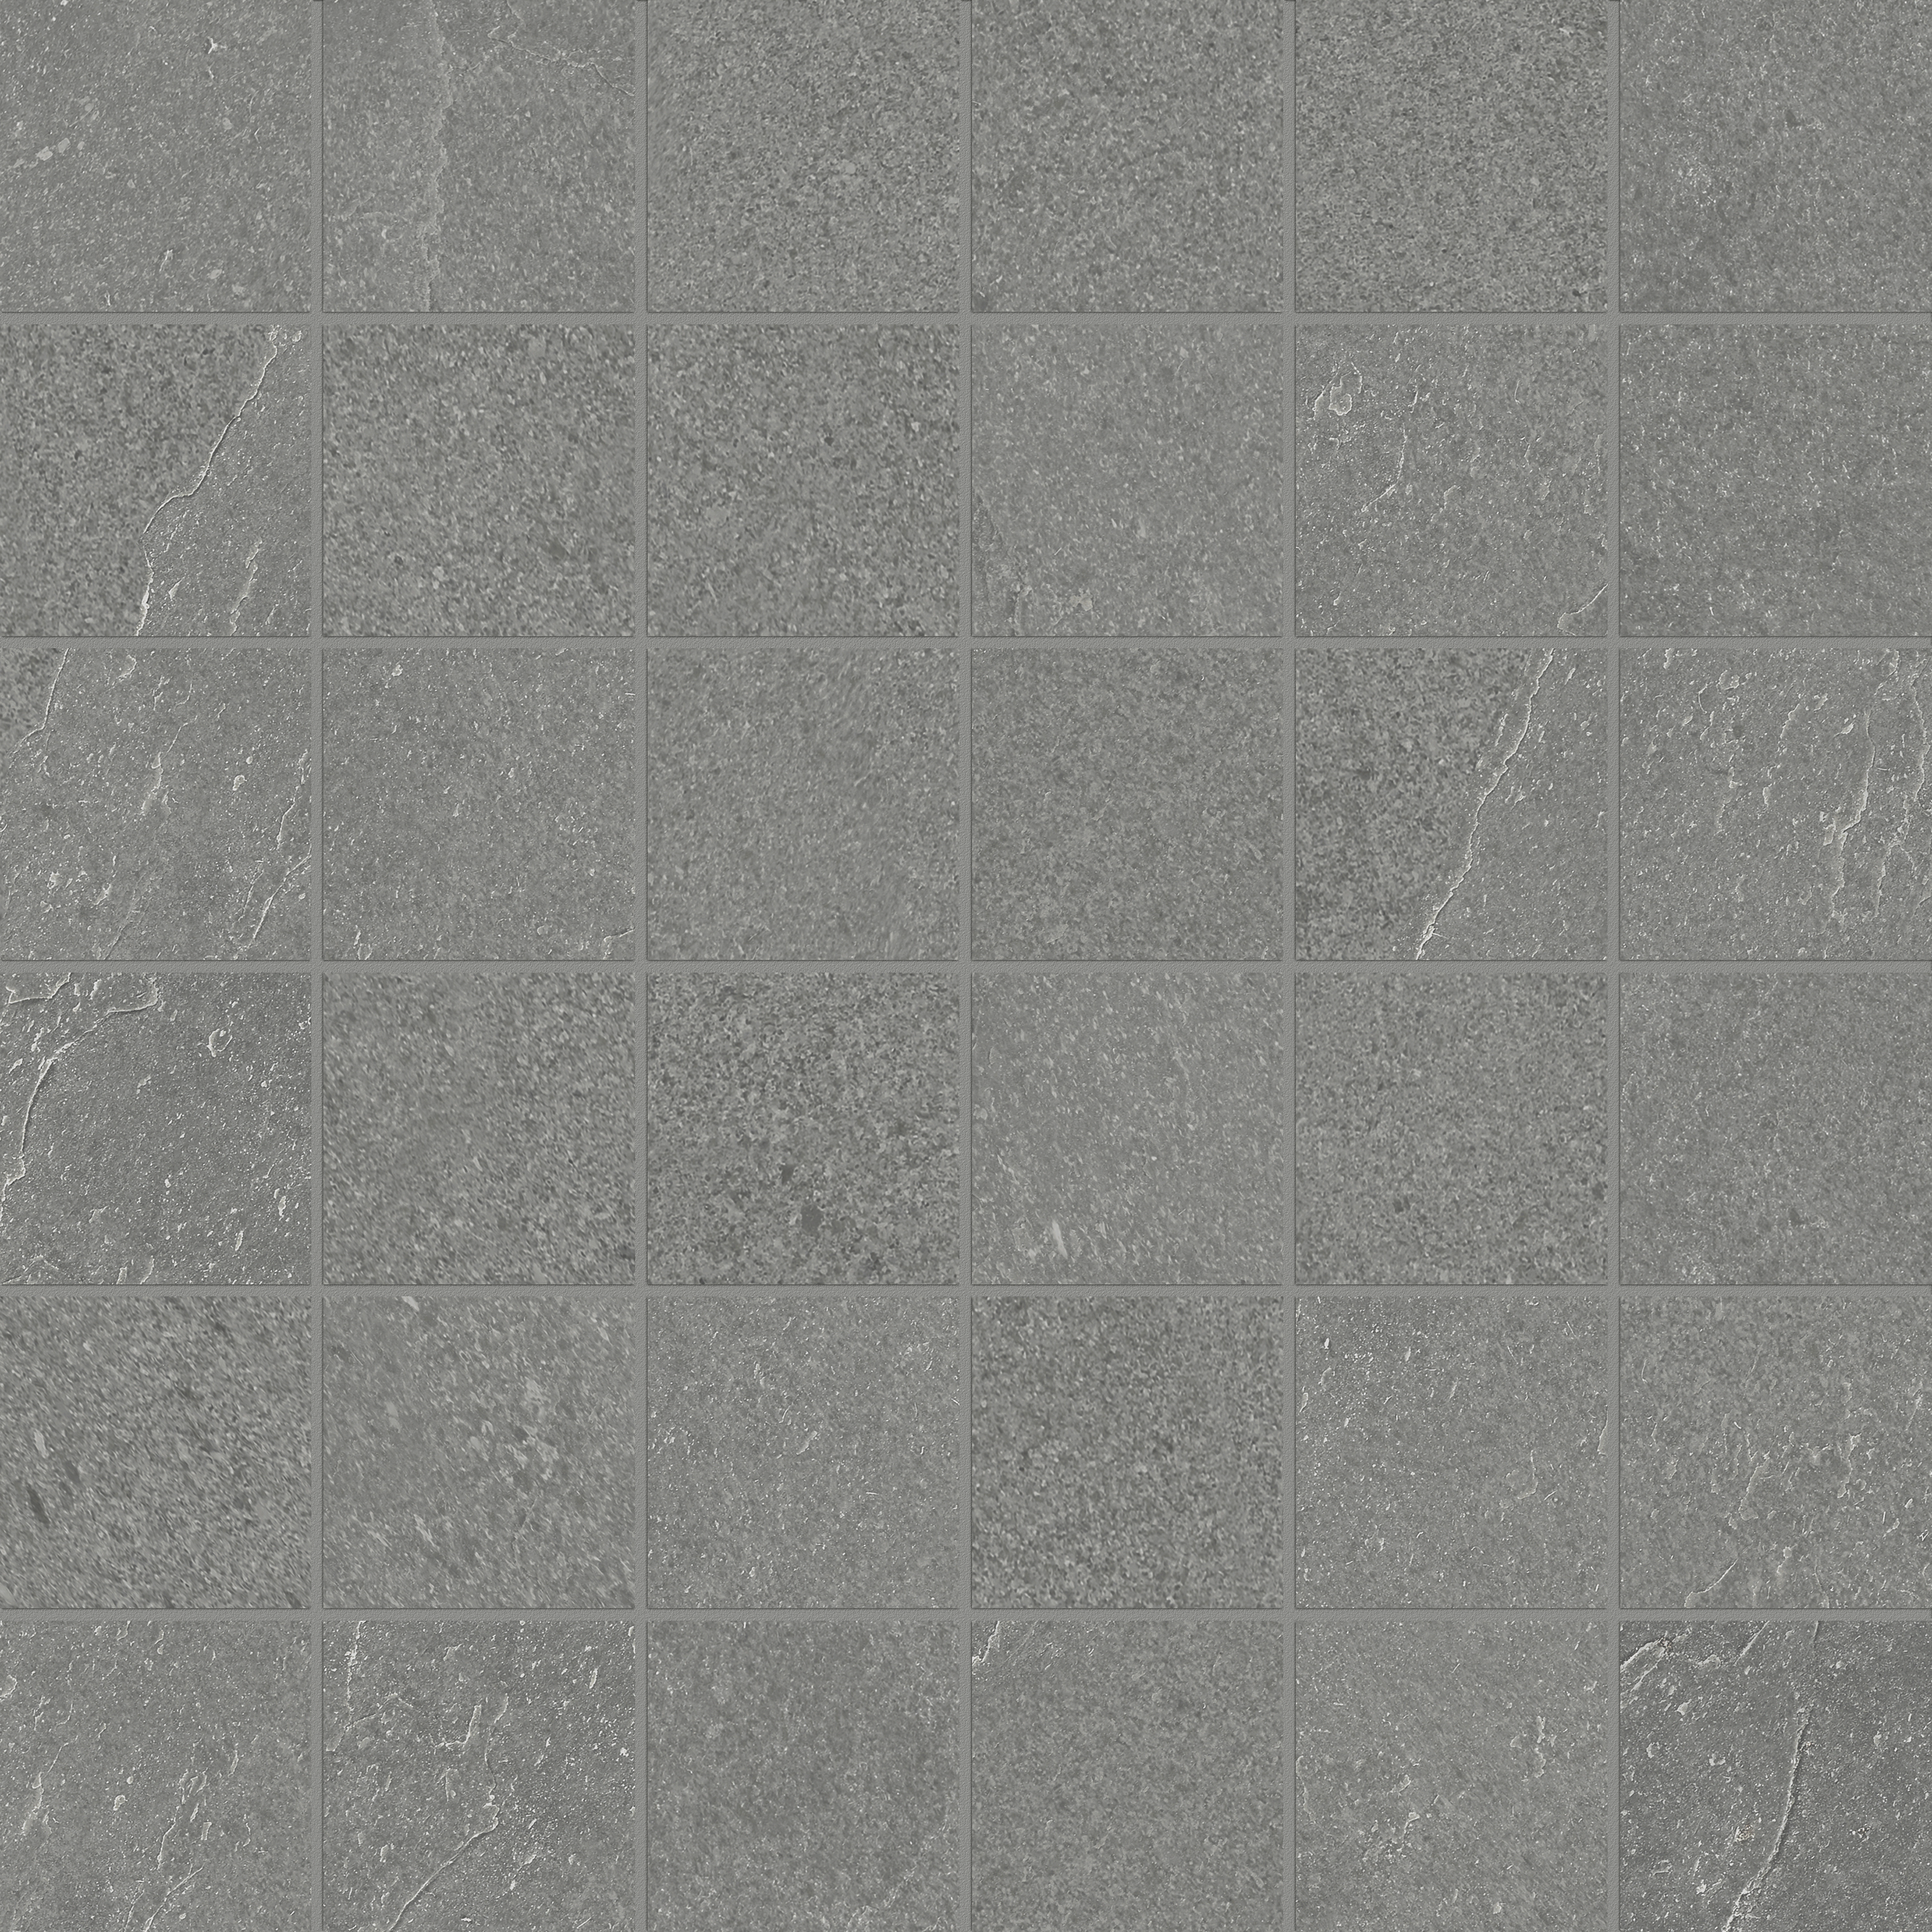 chromium straight stack 2x2-inch pattern color body porcelain mosaic from nord anatolia collection distributed by surface group international matte finish straight edge edge mesh shape